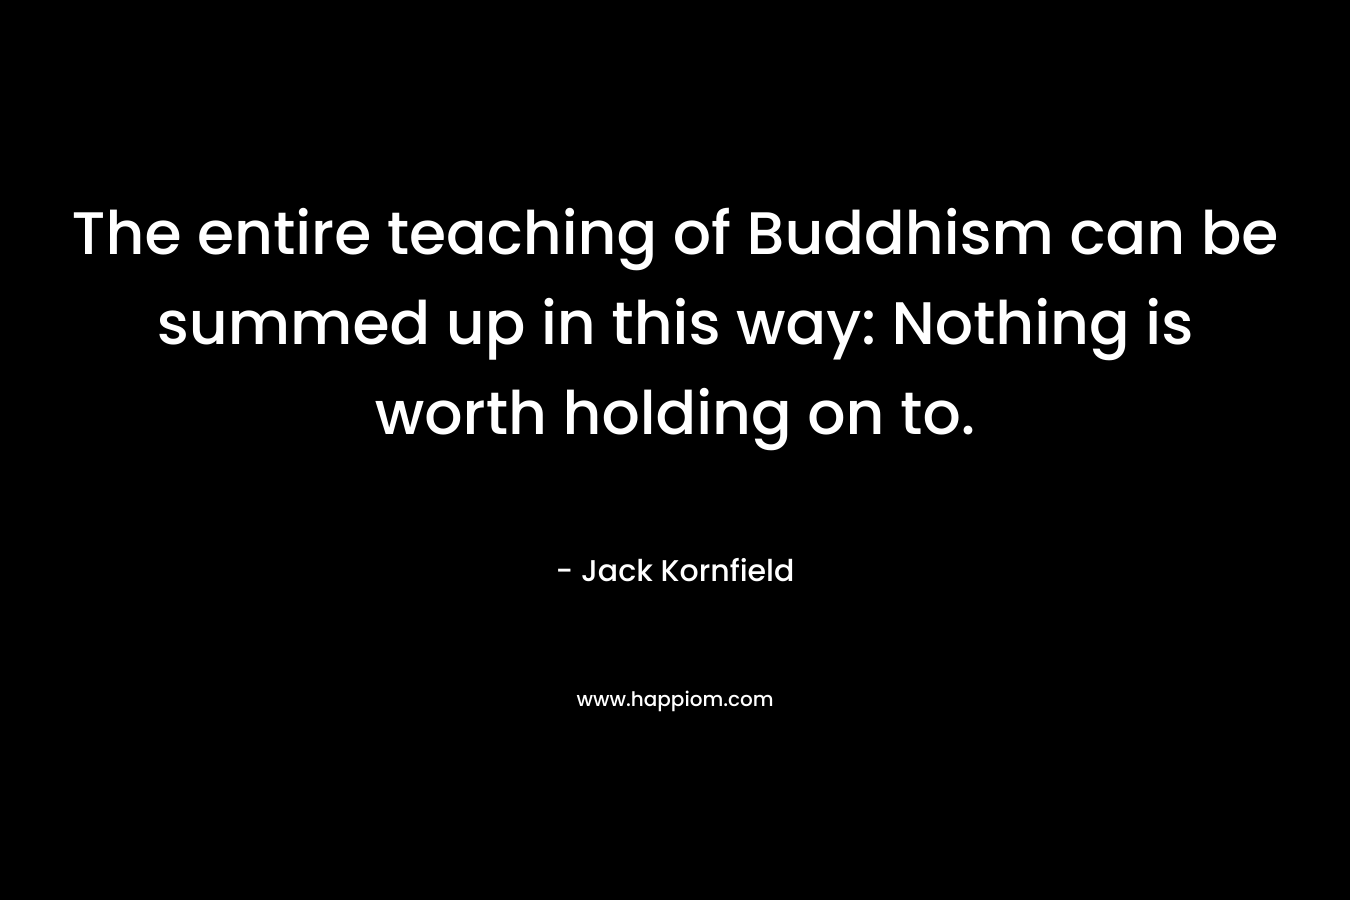 The entire teaching of Buddhism can be summed up in this way: Nothing is worth holding on to. – Jack Kornfield